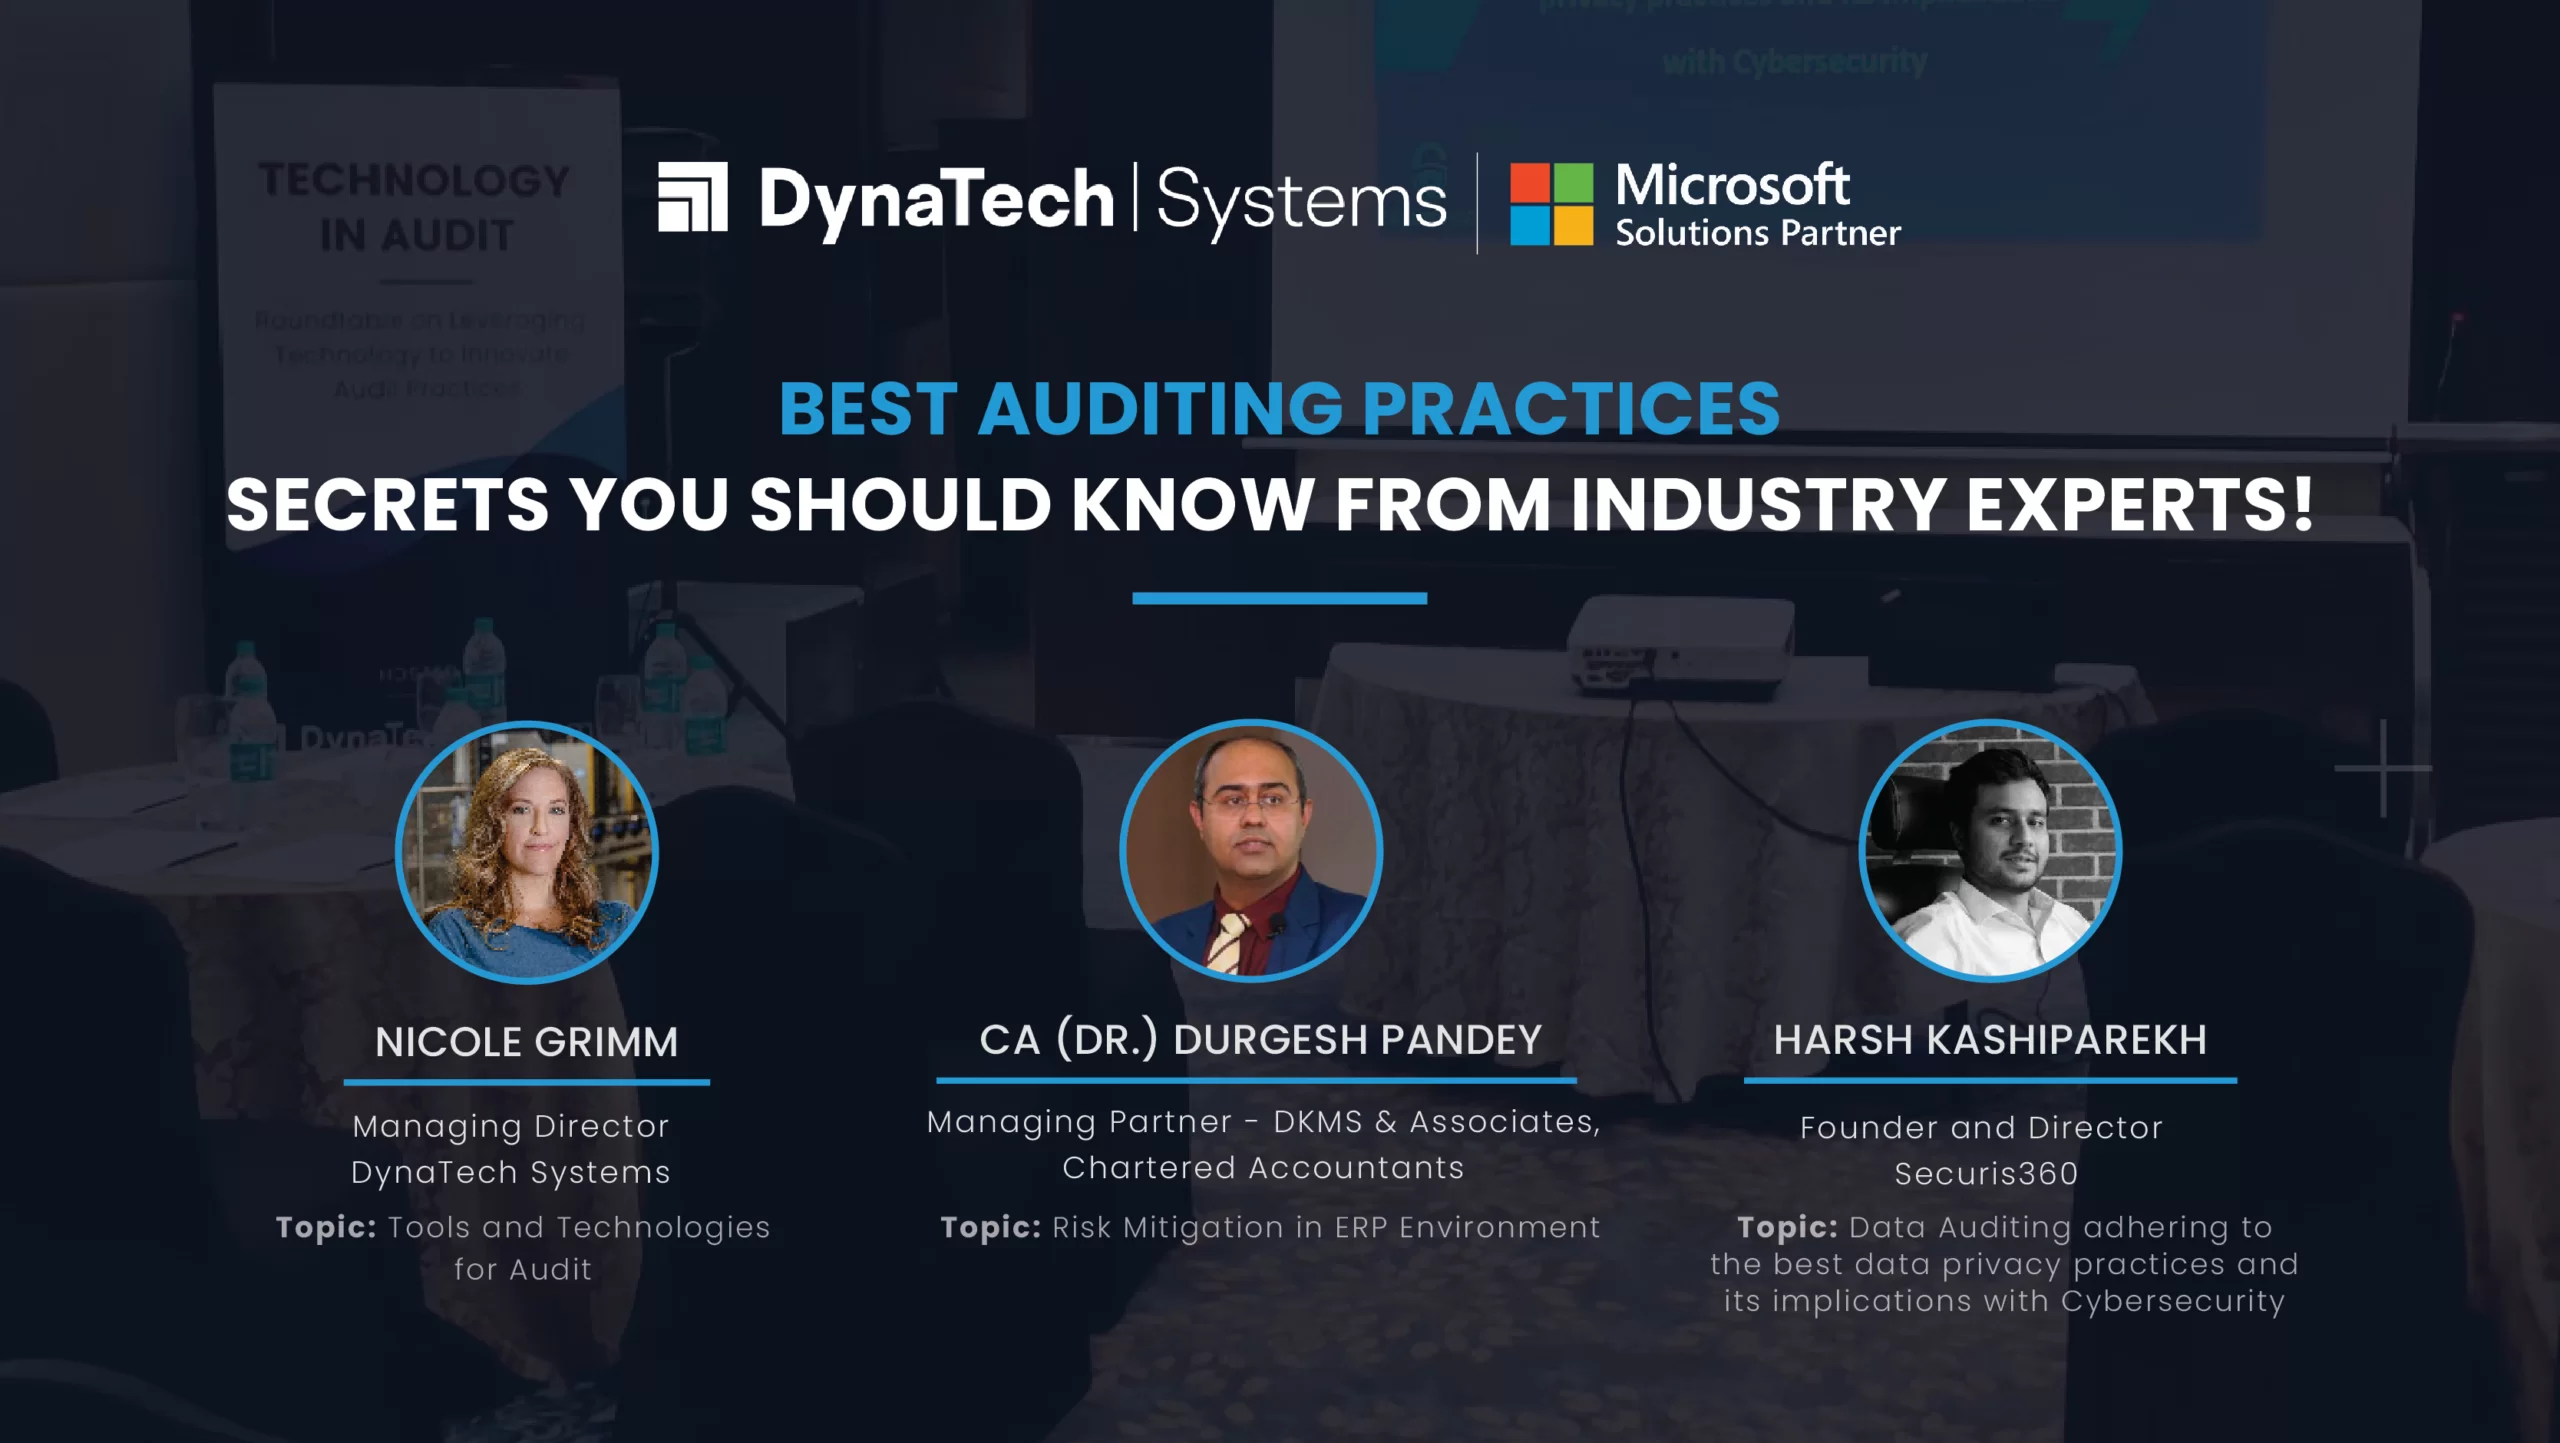 Best Auditing Practices: Secrets You Should Know from Industry Experts